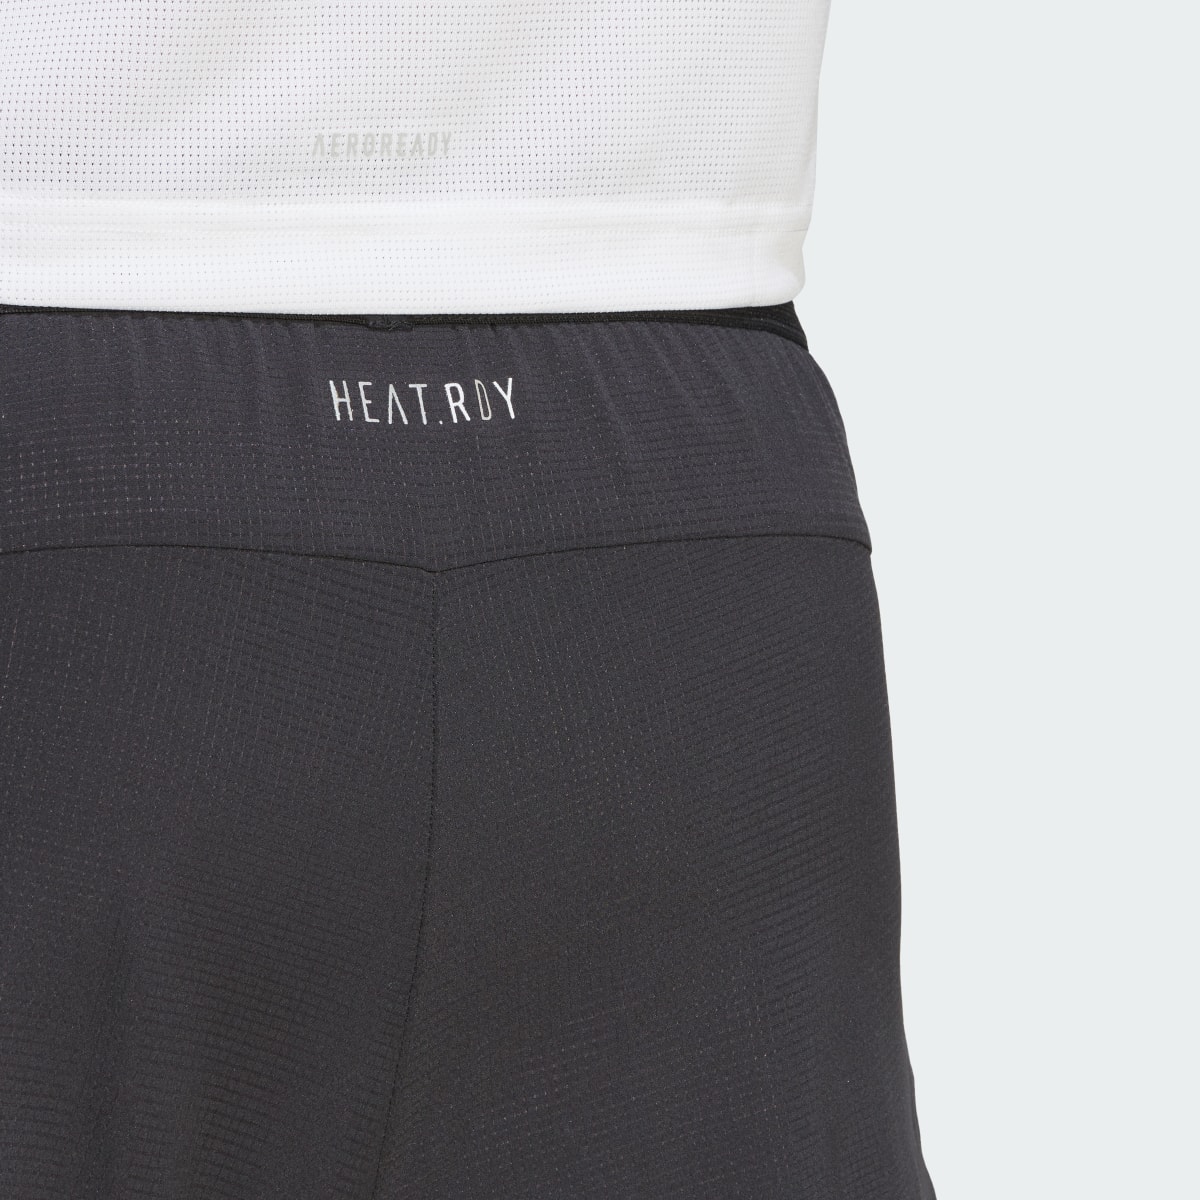 Adidas HEAT.RDY HIIT Elevated Training 2-in-1 Shorts. 6